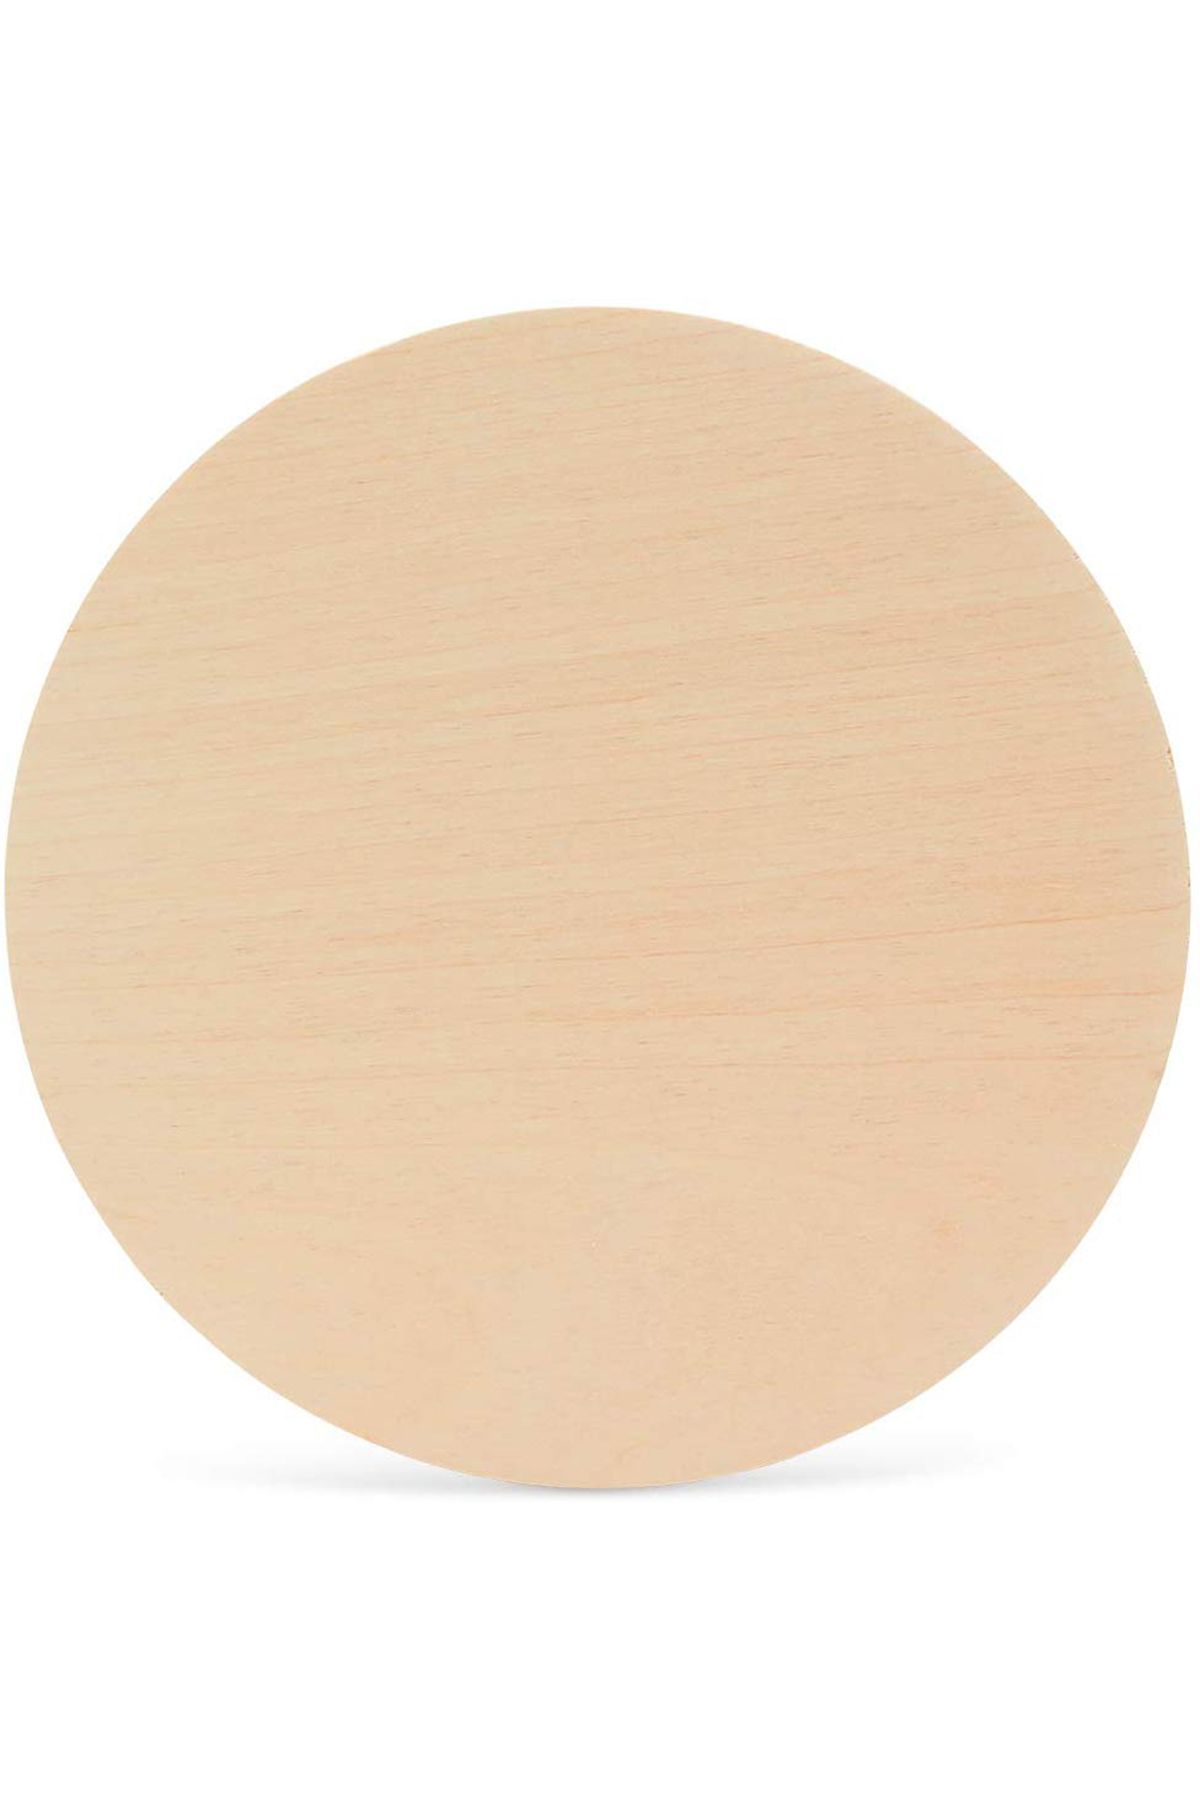 18 Inch Wooden Circle